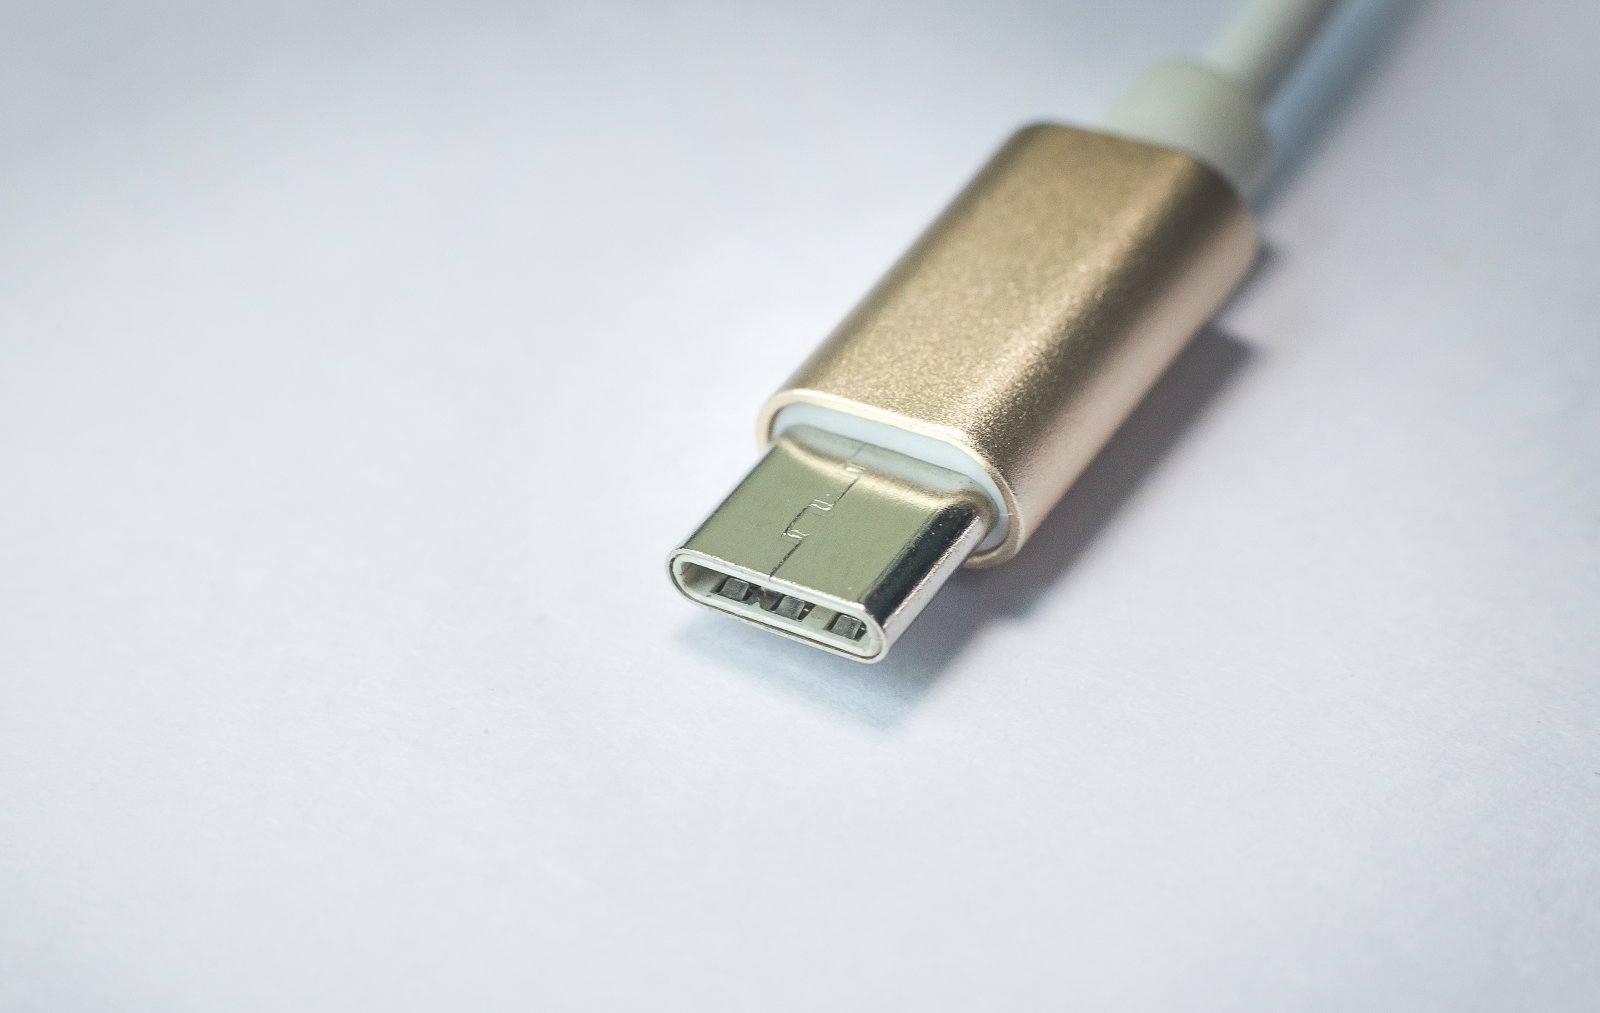 USB-C could soon offer protection against nefarious devices | DeviceDaily.com